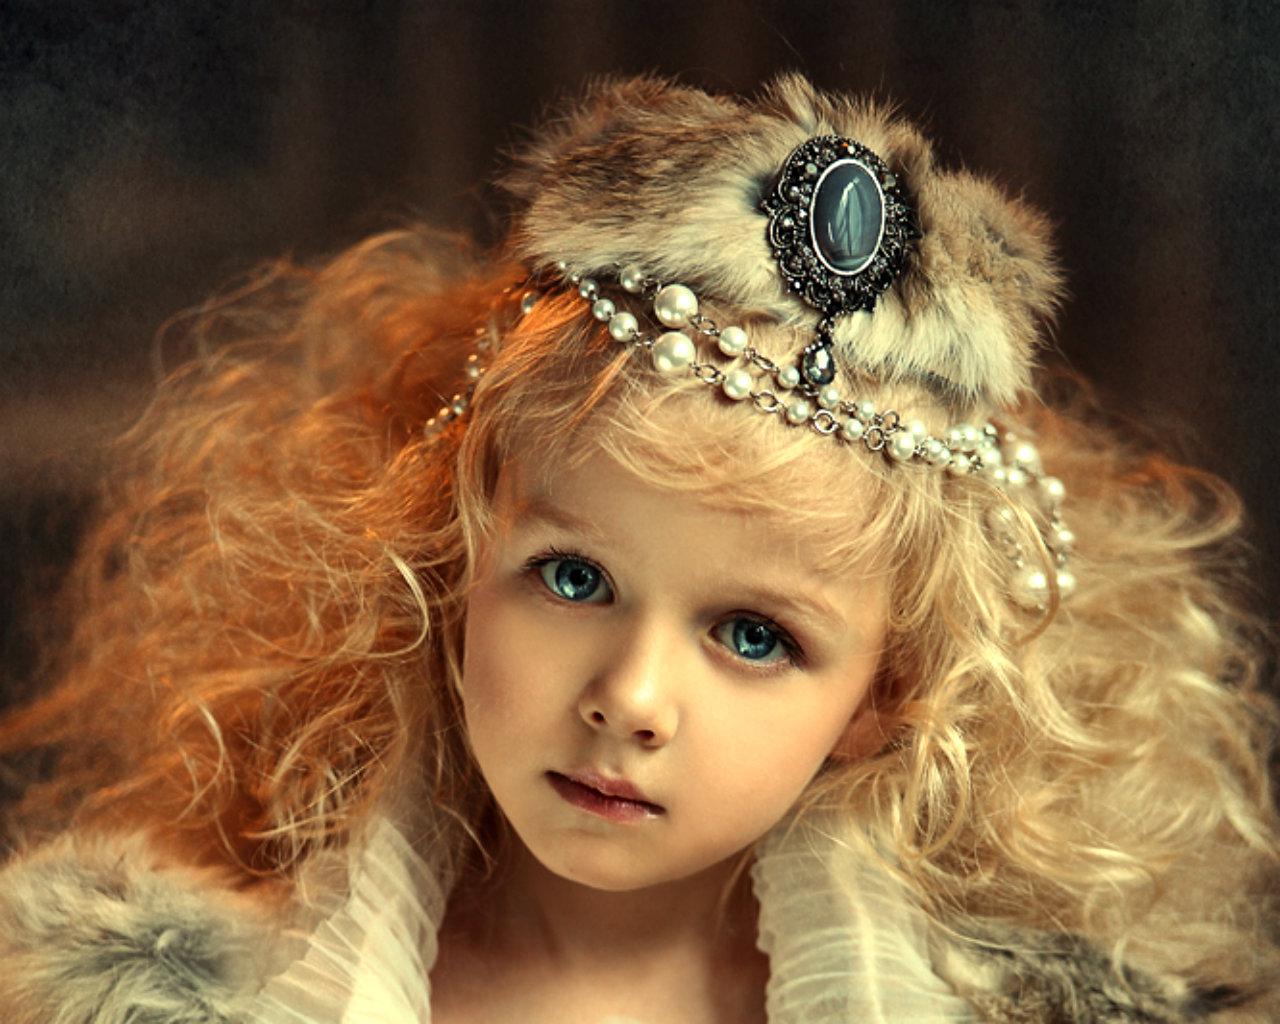 Little Princess High Quality And Resolution Wallpaper On